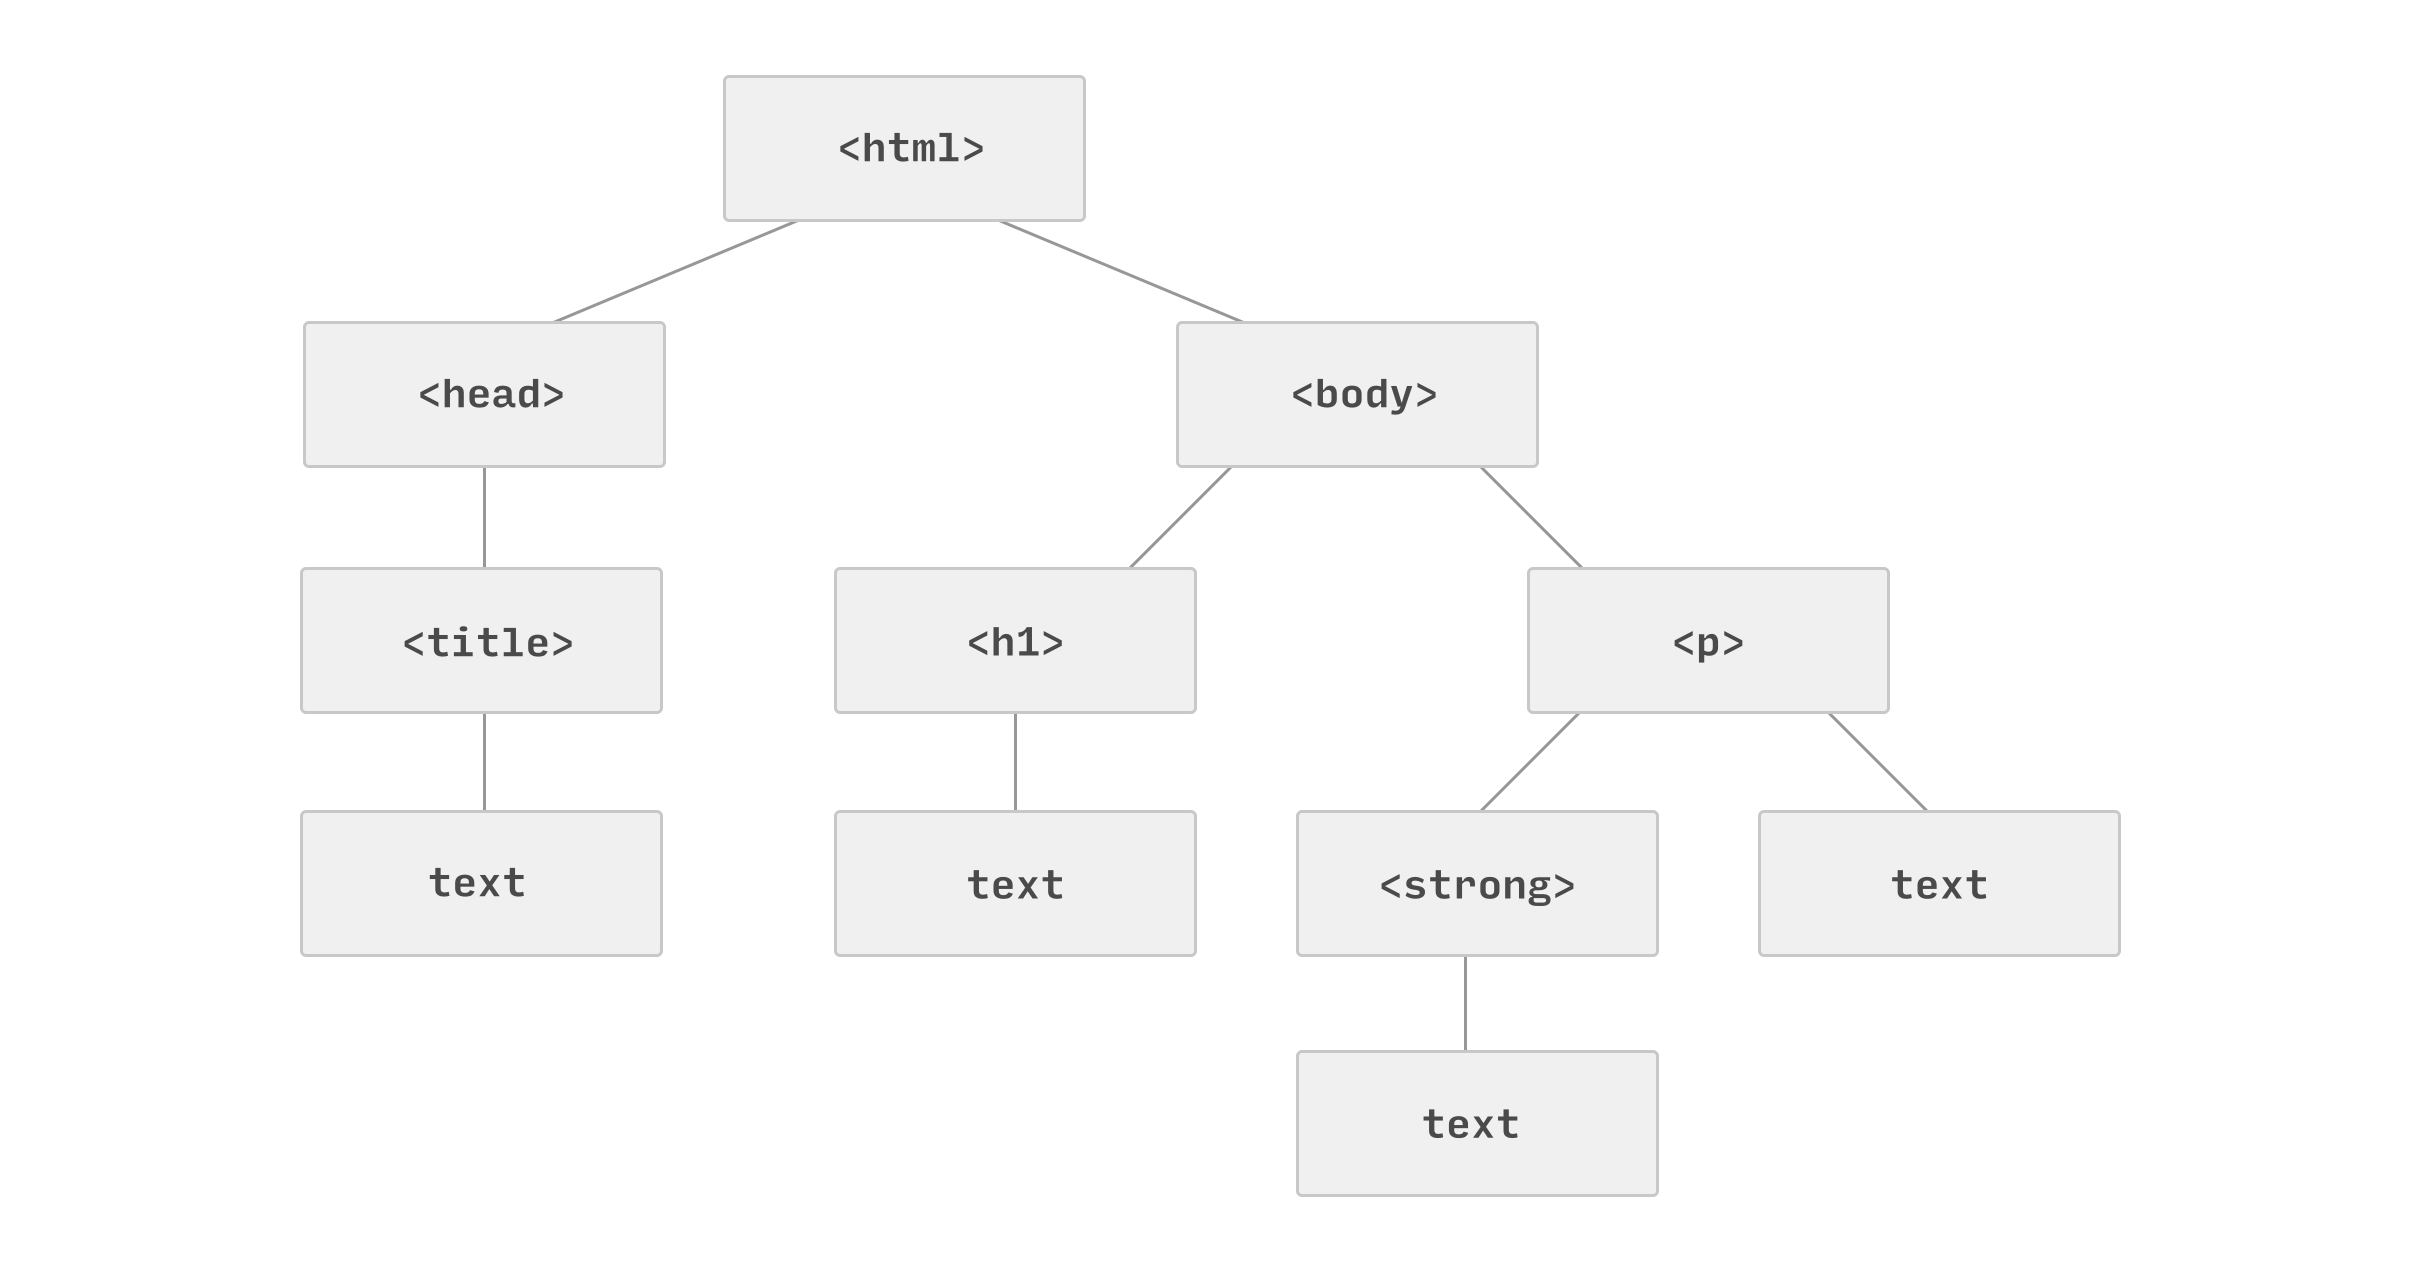 DOM tree diagram of an HTML document.